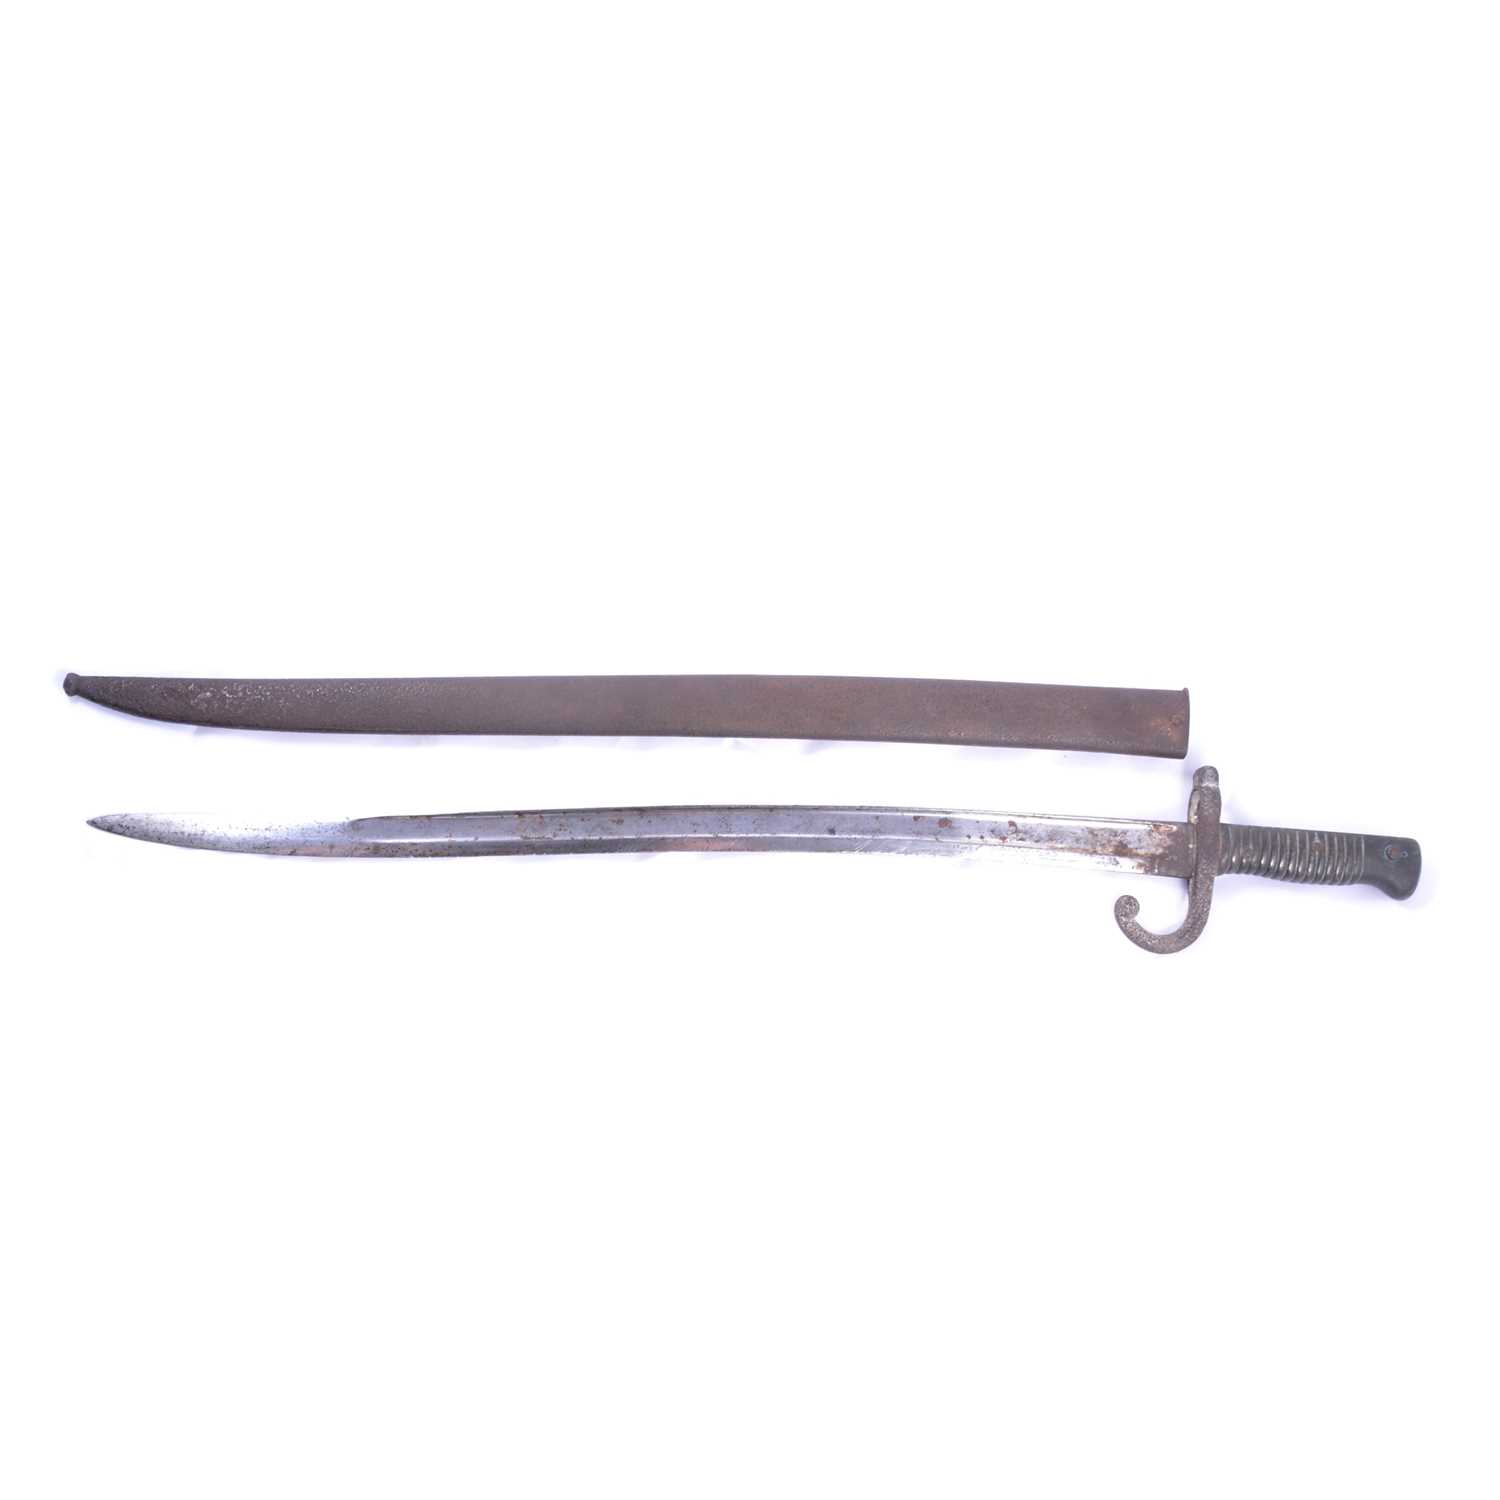 A French bayonet with scabbard